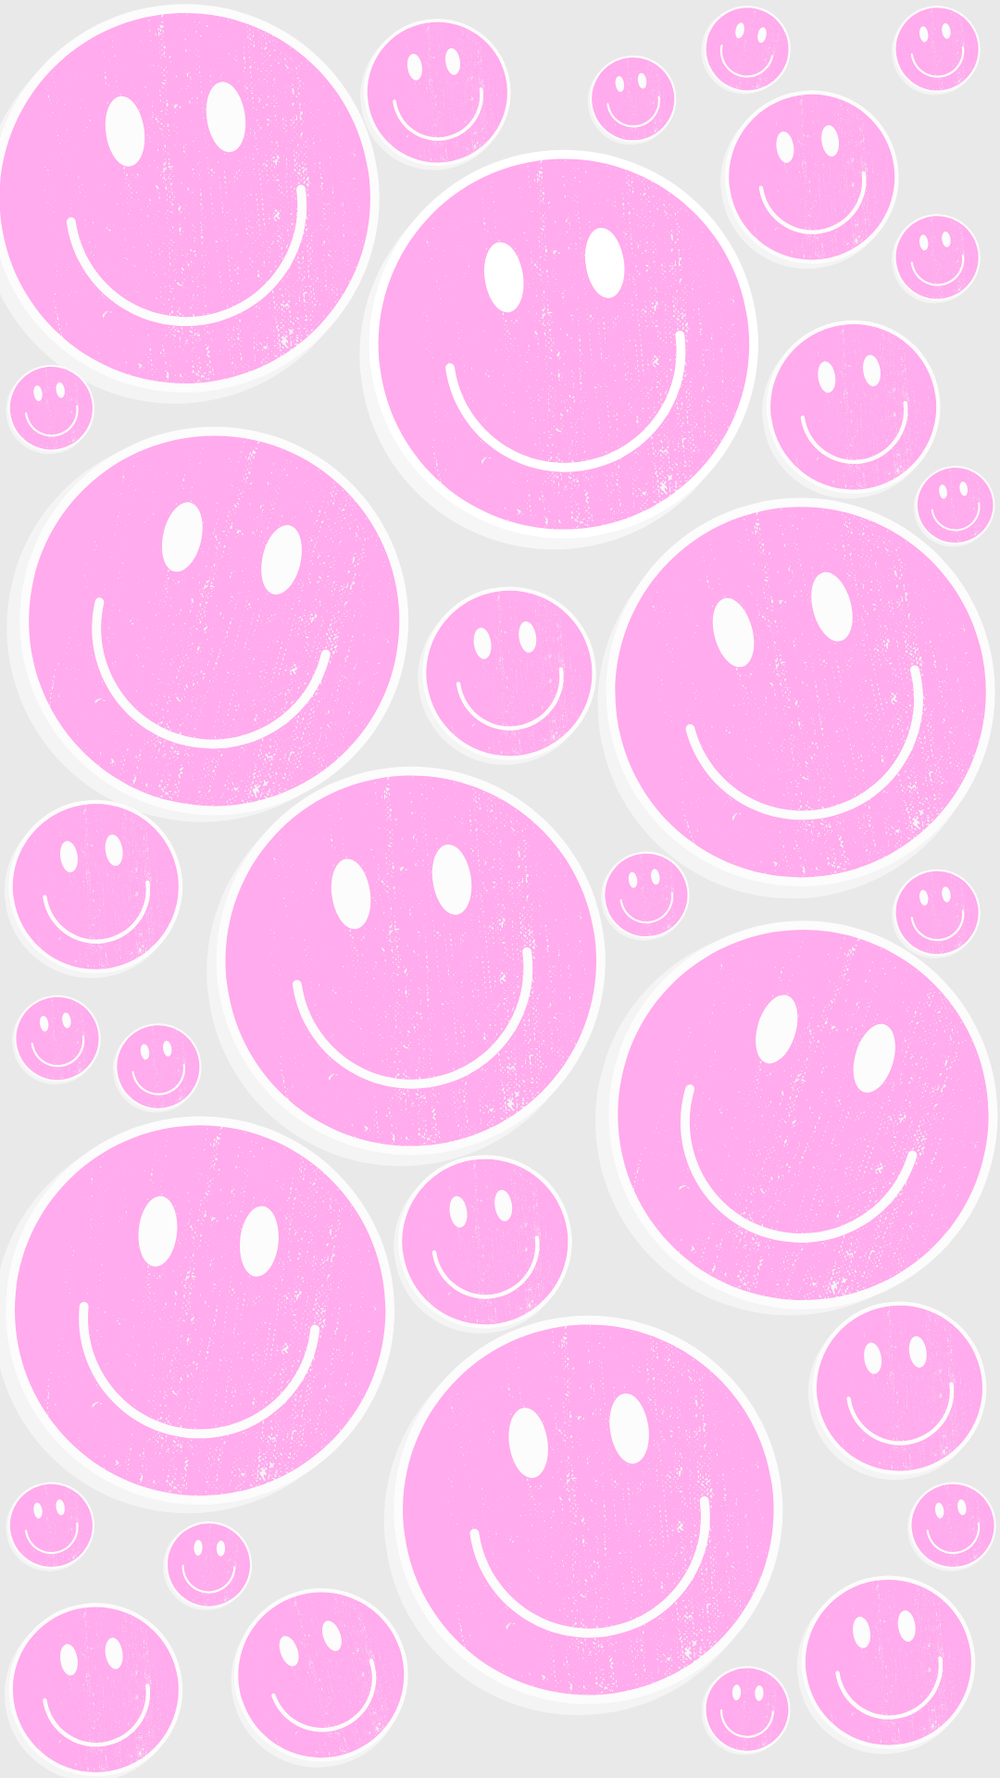 A lot of pink smiley faces on a white background - Smiley